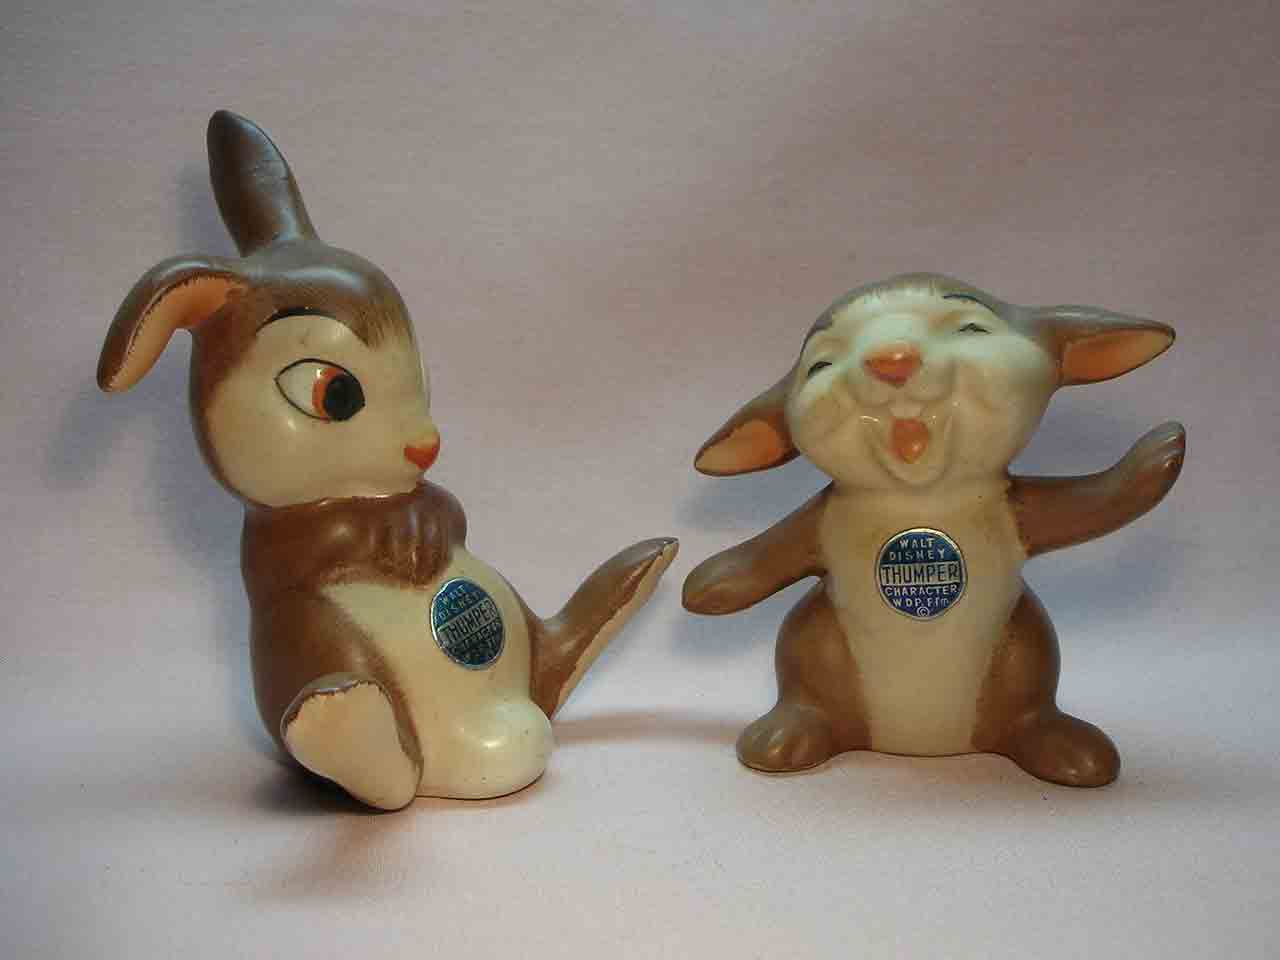 Goebel Thumper bunny rabbits from Bambi salt and pepper shakers